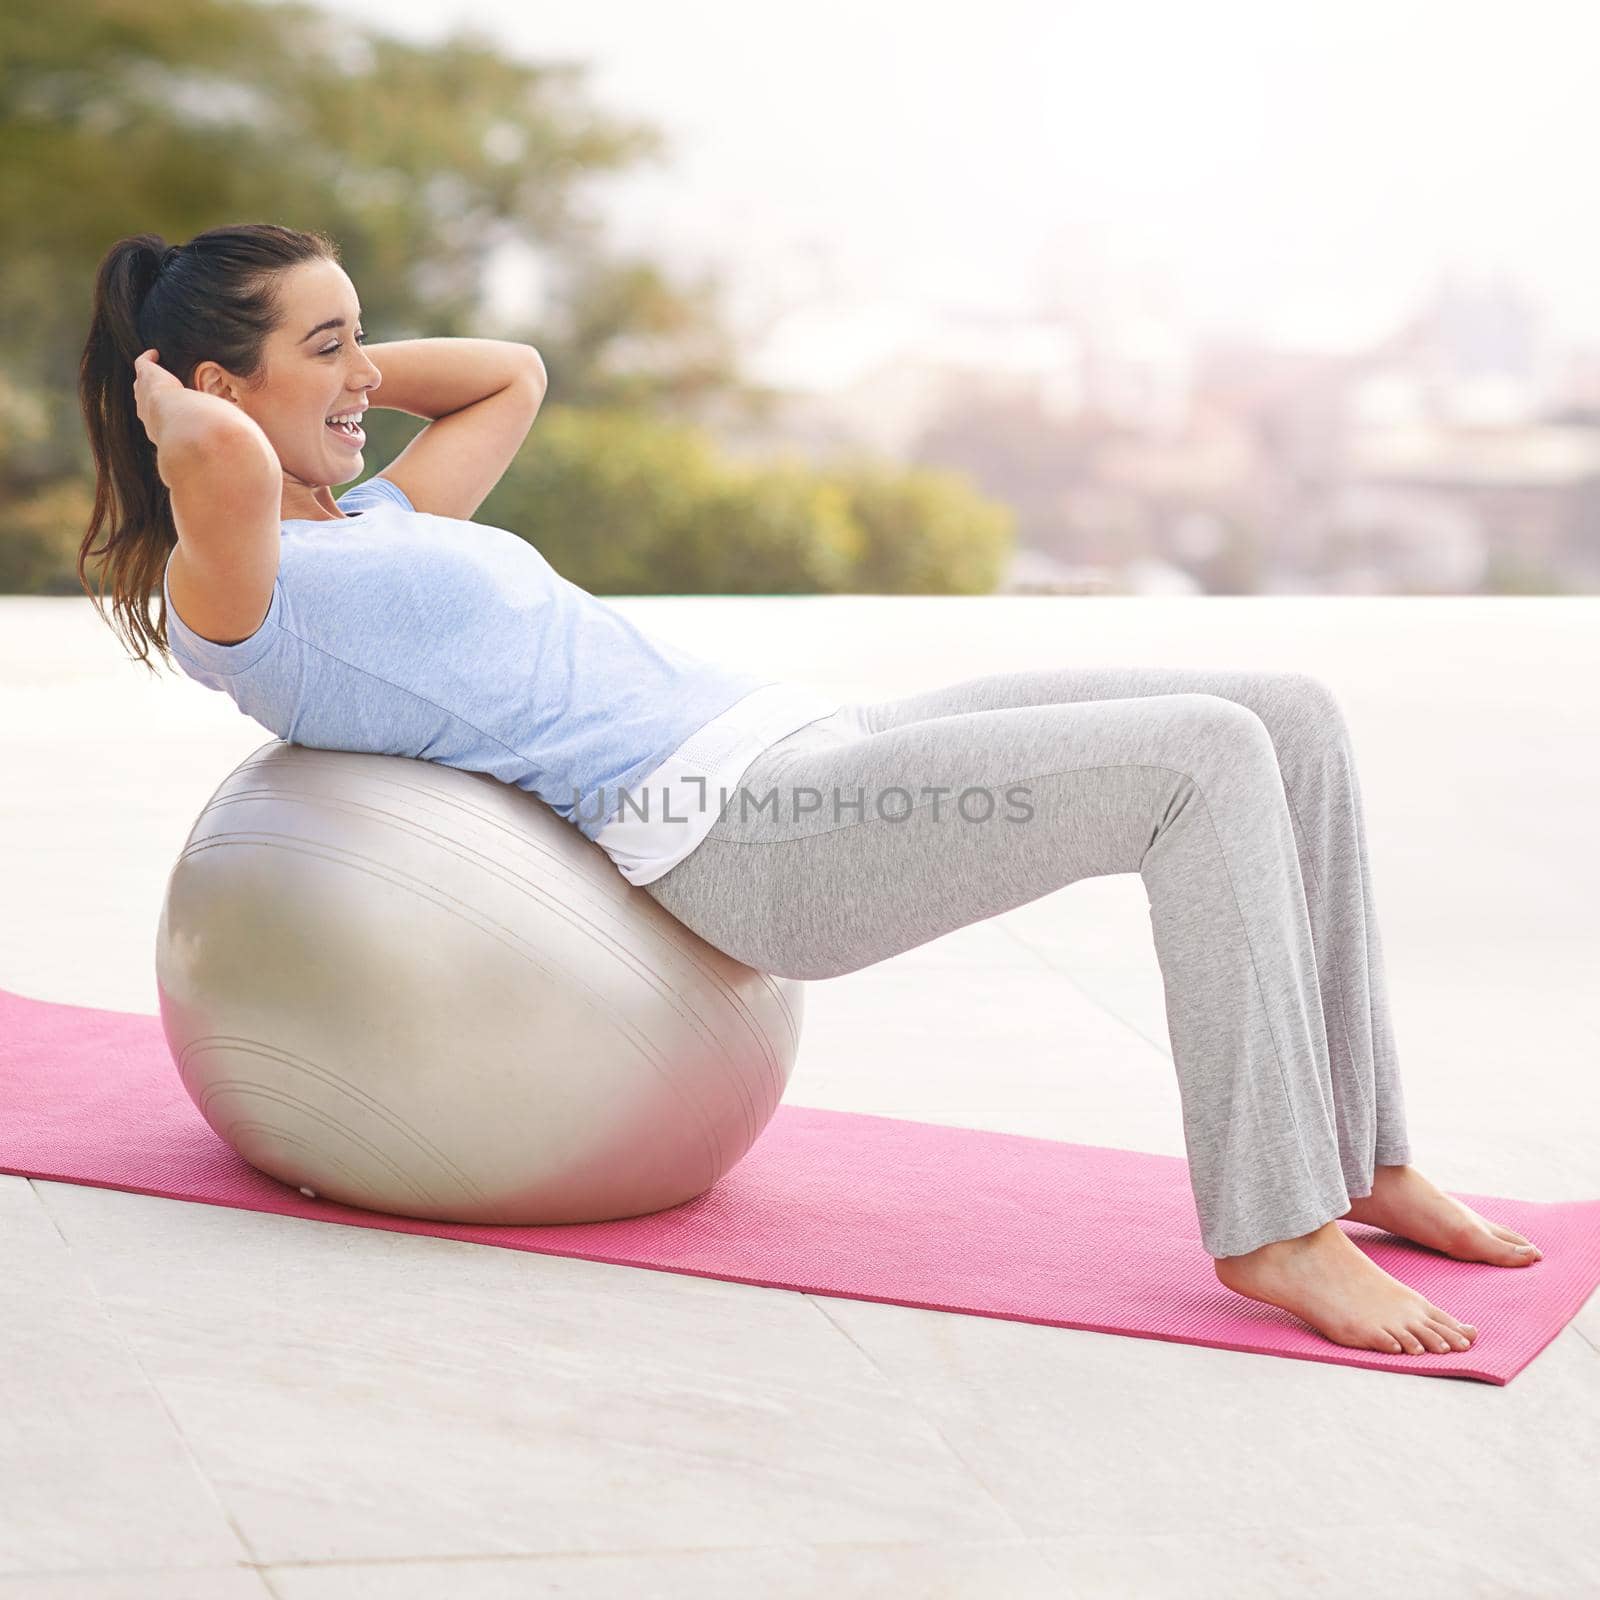 Ready for some ball work. Full length shot of a young woman doing yoga outdoors